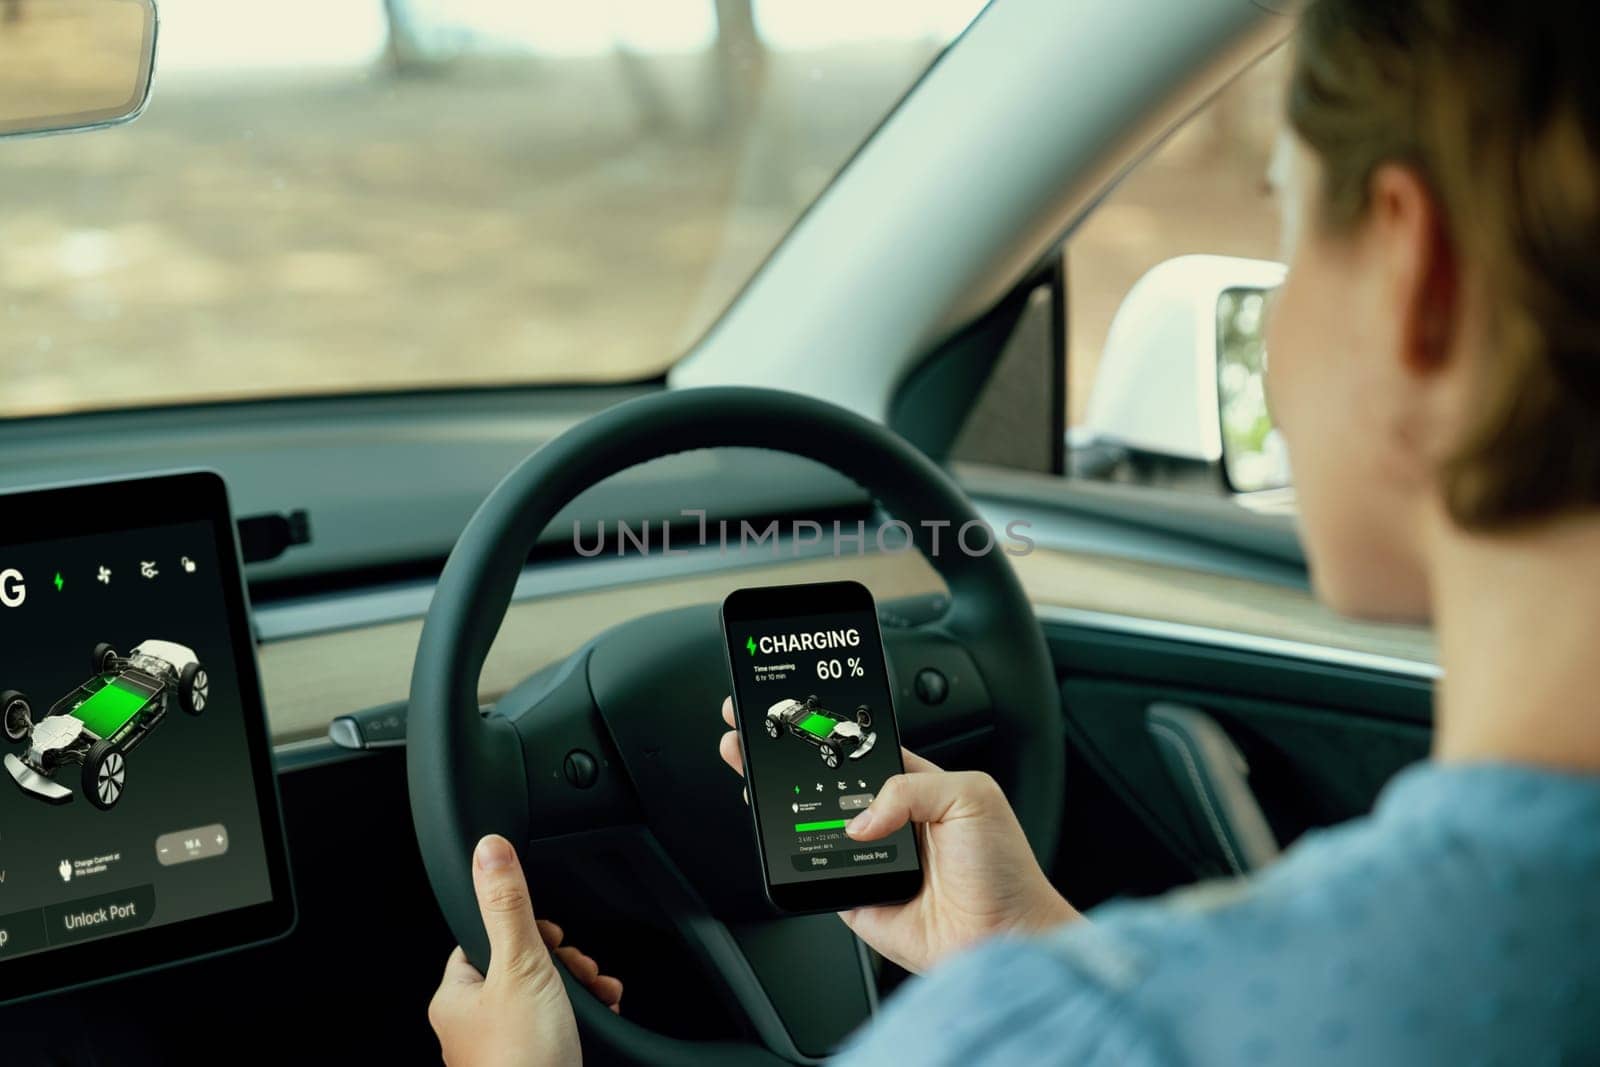 Holiday vacation road trip with environmental-friendly car concept. Eco-conscious woman on driver seat checking EV car's battery status display on tablet or car panel during car travel. Perpetual